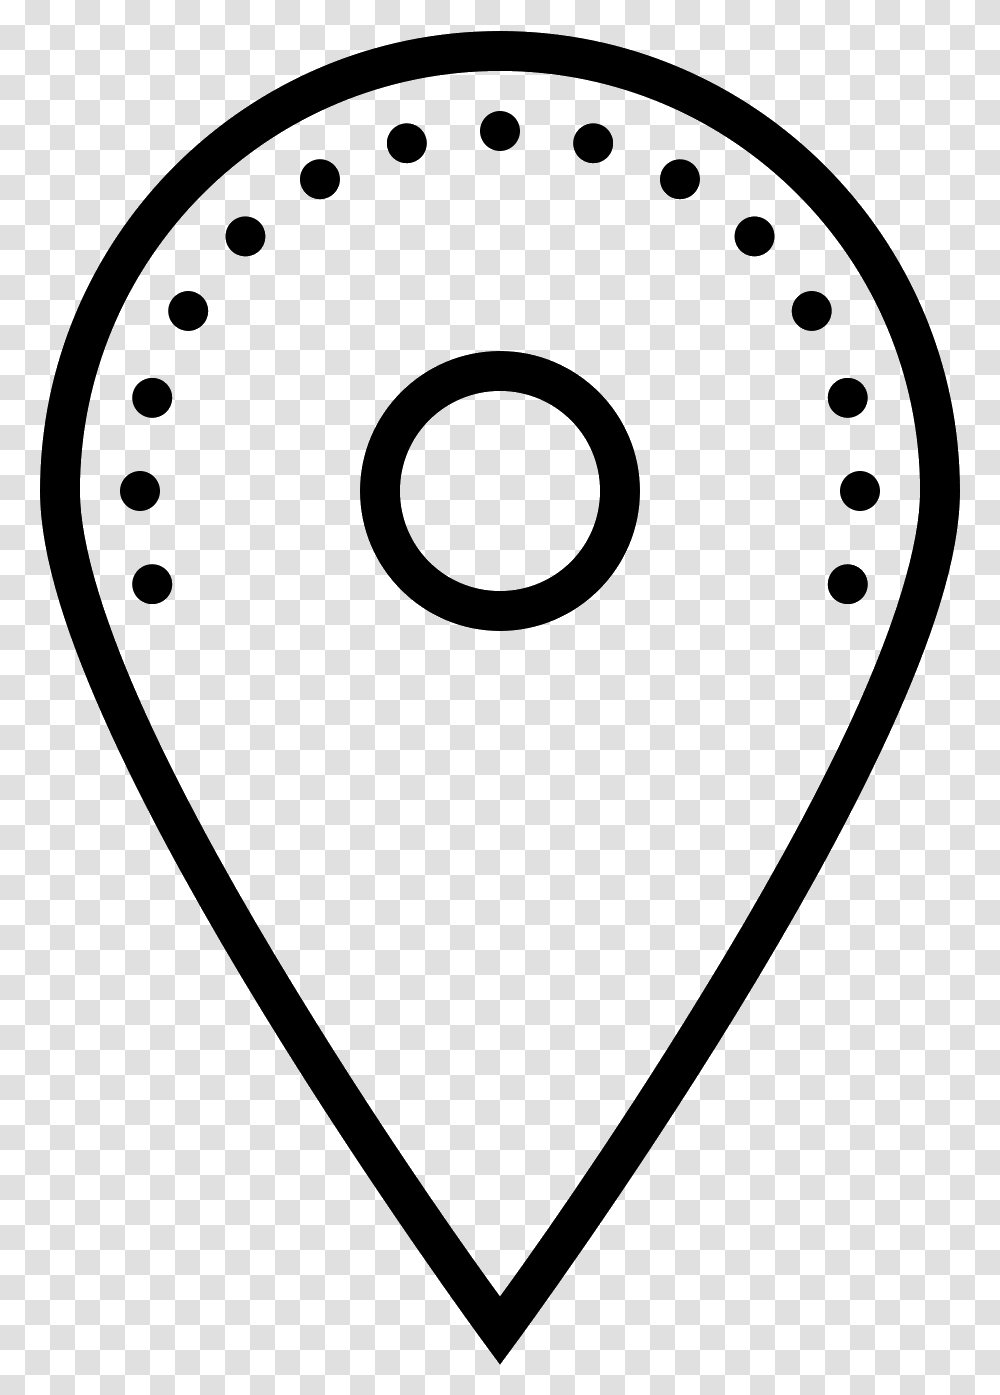 The Icon Is Described As A Marker And Is An Arrow Shape Portable Network Graphics, Gray, World Of Warcraft Transparent Png